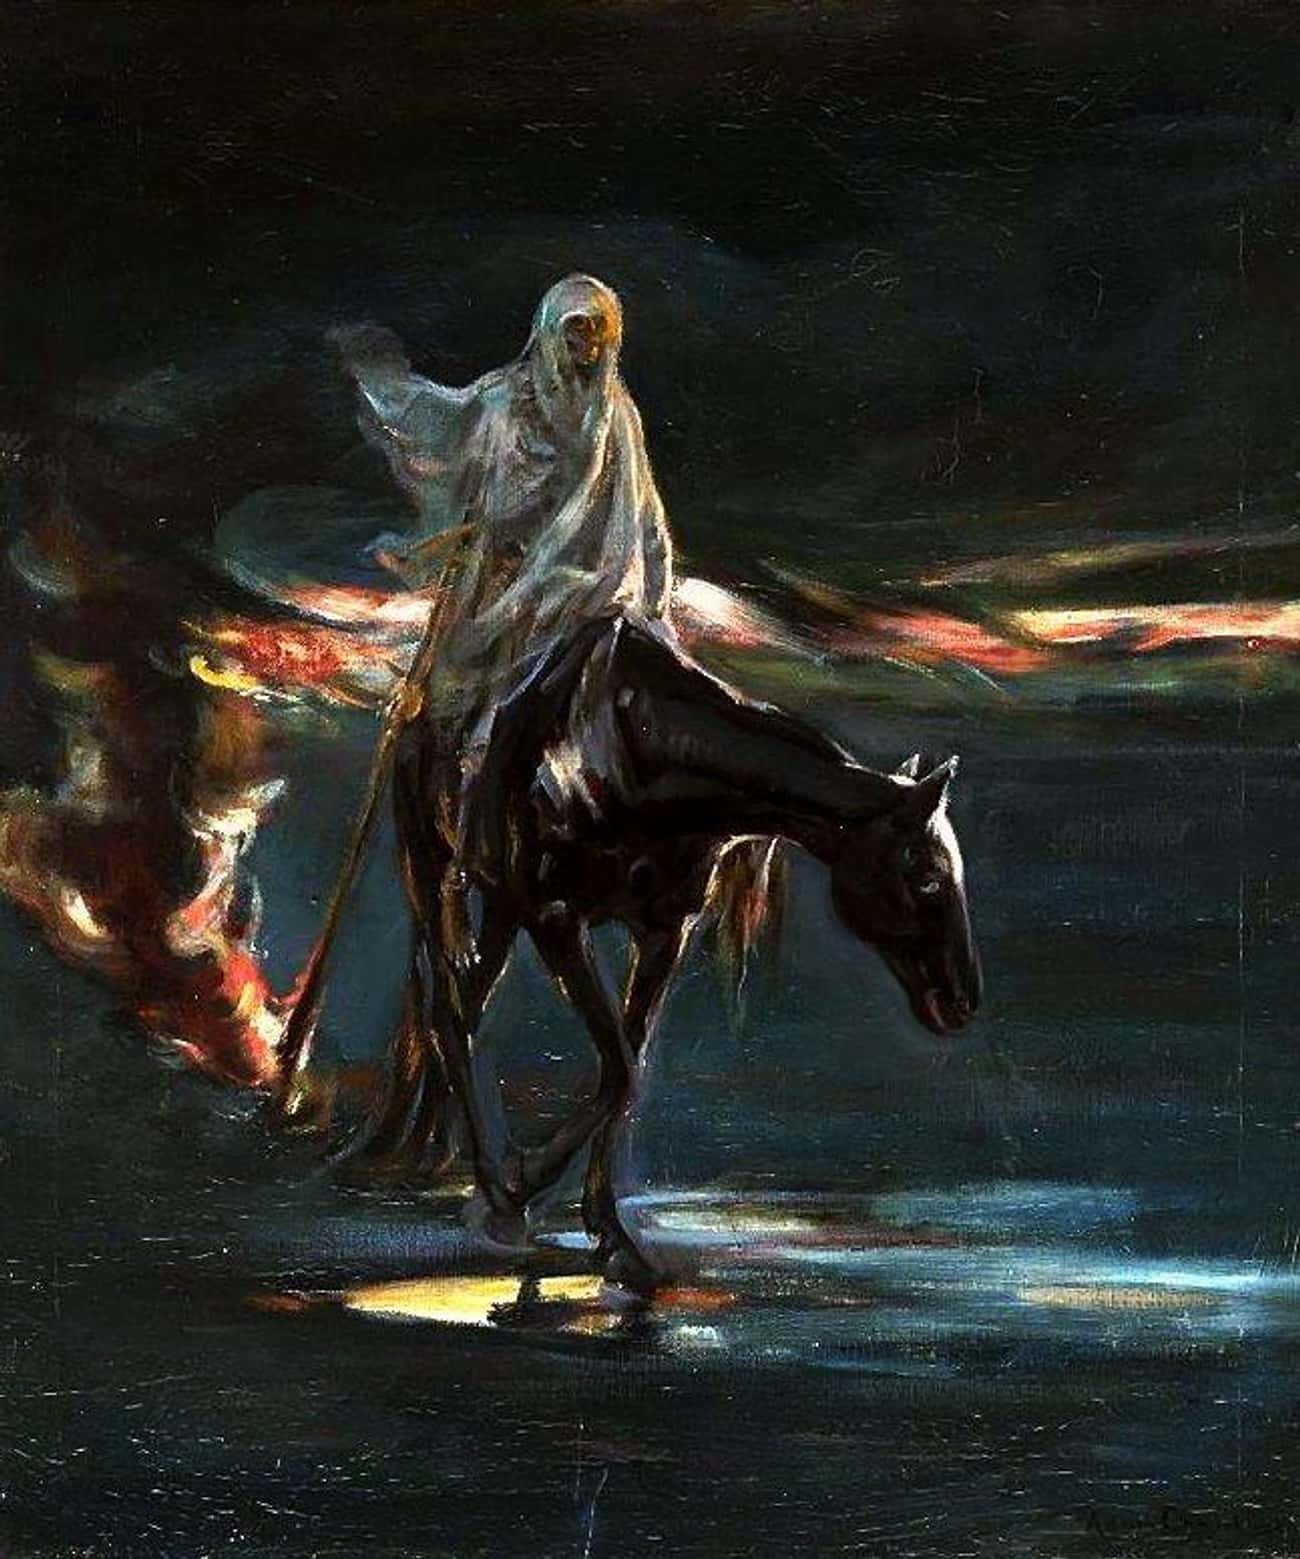 'The Death and conflagration, central part of the triptych Disaster' By Albert Chmielowski, After 1870